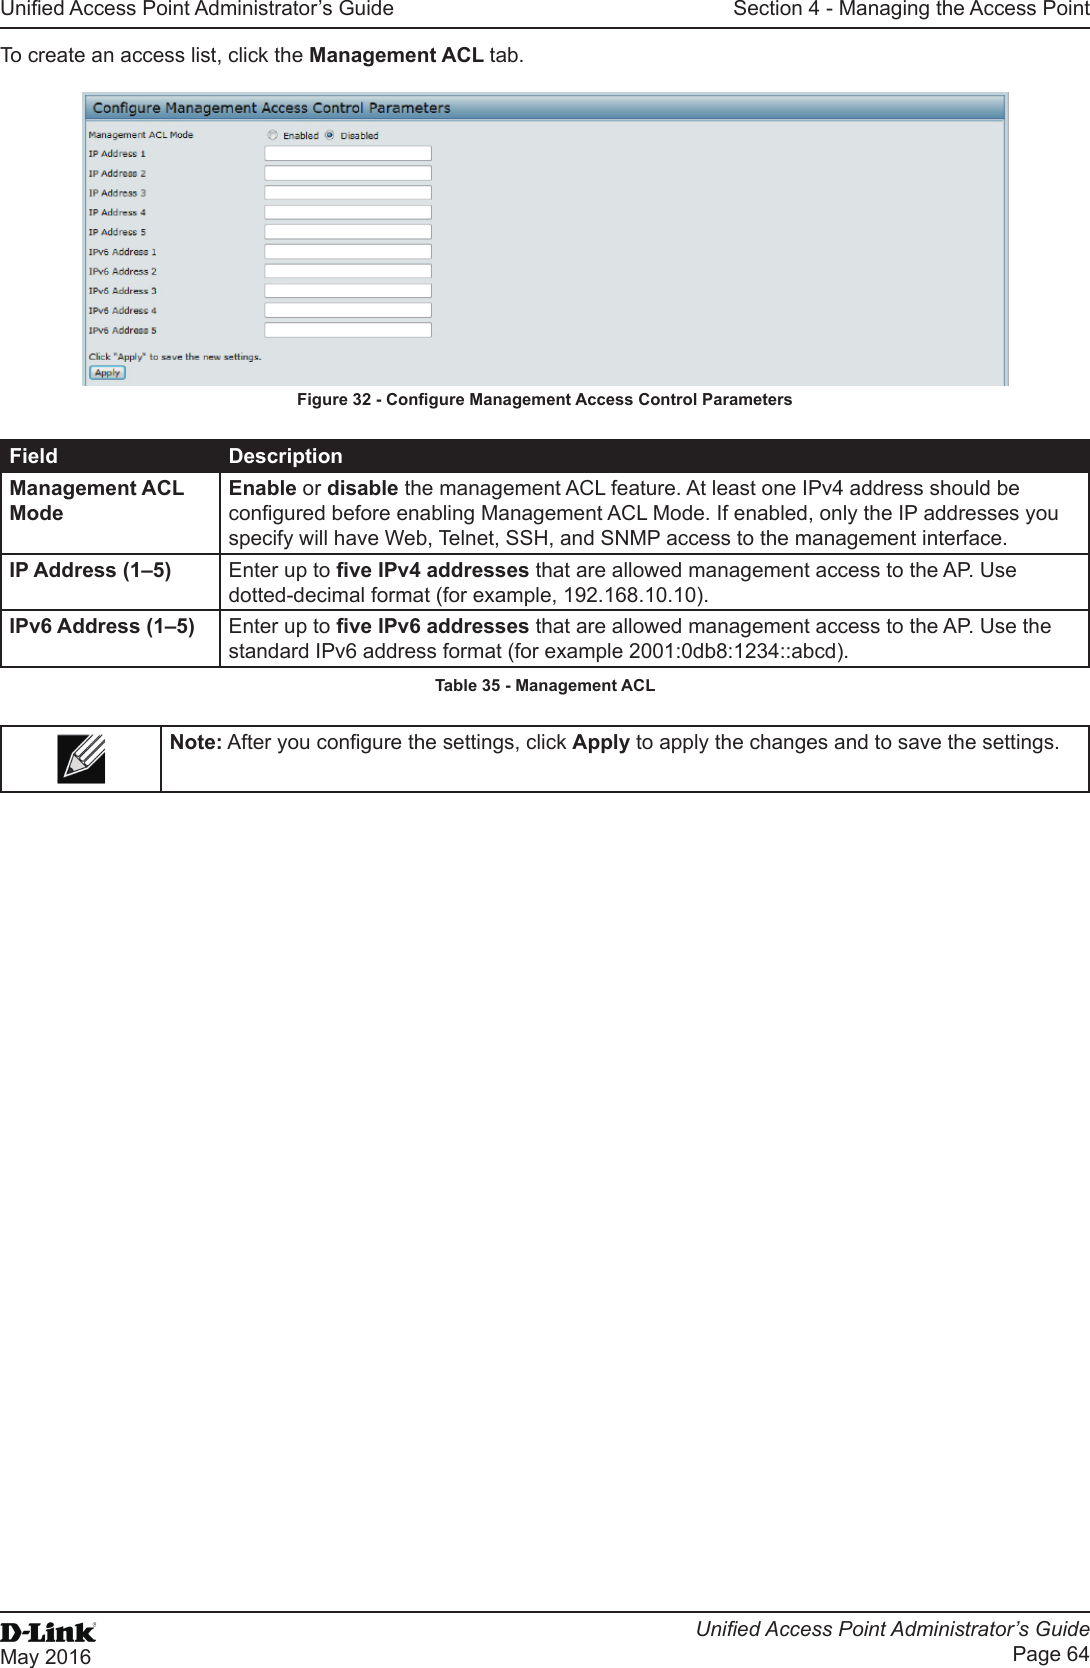 Unied Access Point Administrator’s GuideUnied Access Point Administrator’s GuidePage 64May 2016Section 4 - Managing the Access PointTo create an access list, click the Management ACL tab.Figure 32 - Congure Management Access Control ParametersField DescriptionManagement ACL ModeEnable or disable the management ACL feature. At least one IPv4 address should be congured before enabling Management ACL Mode. If enabled, only the IP addresses you specify will have Web, Telnet, SSH, and SNMP access to the management interface.IP Address (1–5) Enter up to ve IPv4 addresses that are allowed management access to the AP. Use dotted-decimal format (for example, 192.168.10.10).IPv6 Address (1–5) Enter up to ve IPv6 addresses that are allowed management access to the AP. Use the standard IPv6 address format (for example 2001:0db8:1234::abcd).Table 35 - Management ACLNote: After you congure the settings, click Apply to apply the changes and to save the settings.